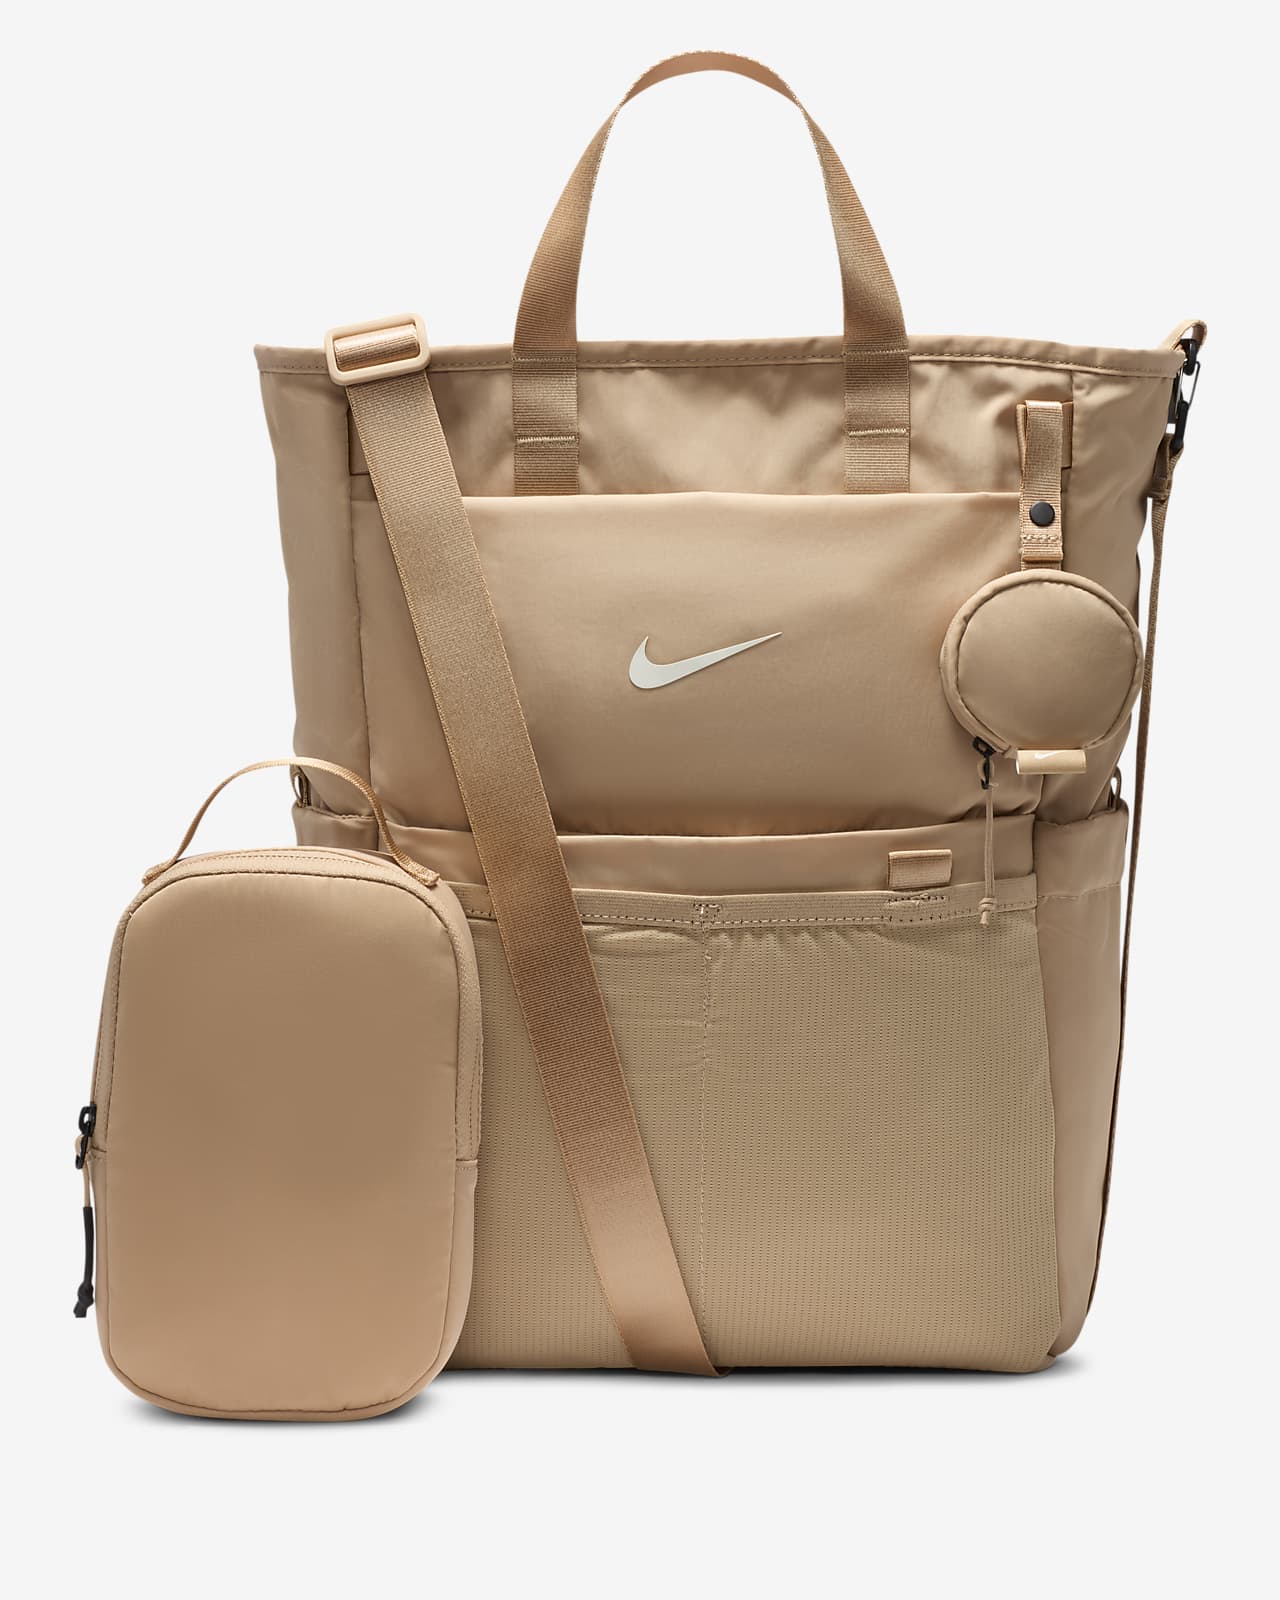 Nike bag • Compare (500+ products) see best price now »-cokhiquangminh.vn